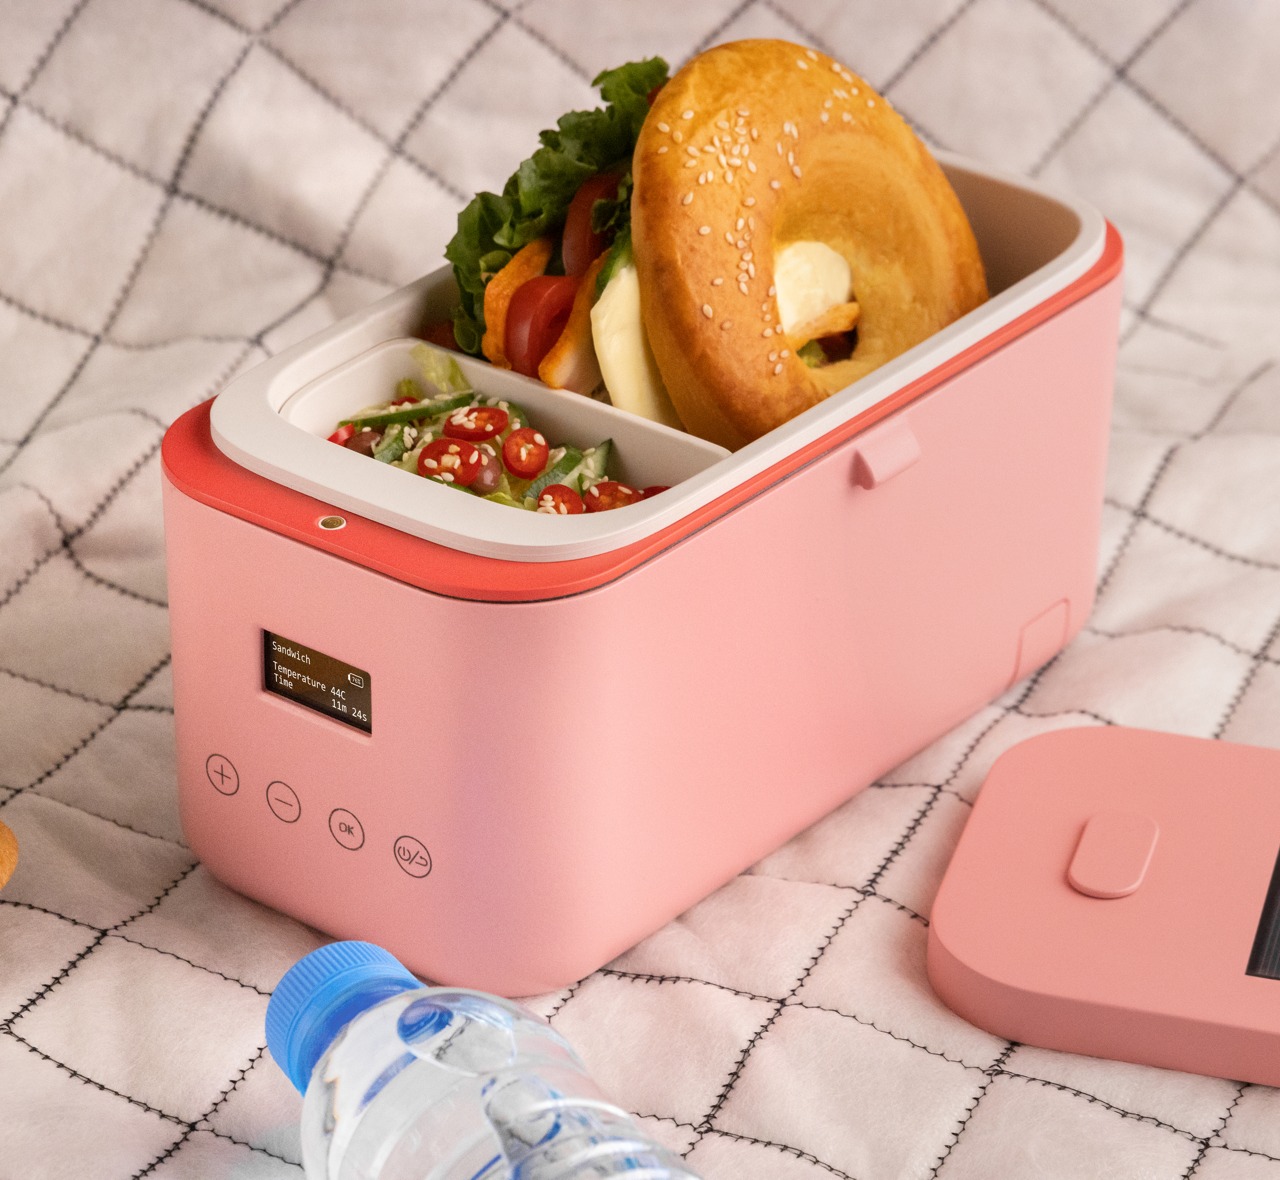 Solar-powered lunchbox keeps your food hot or even cool, depending